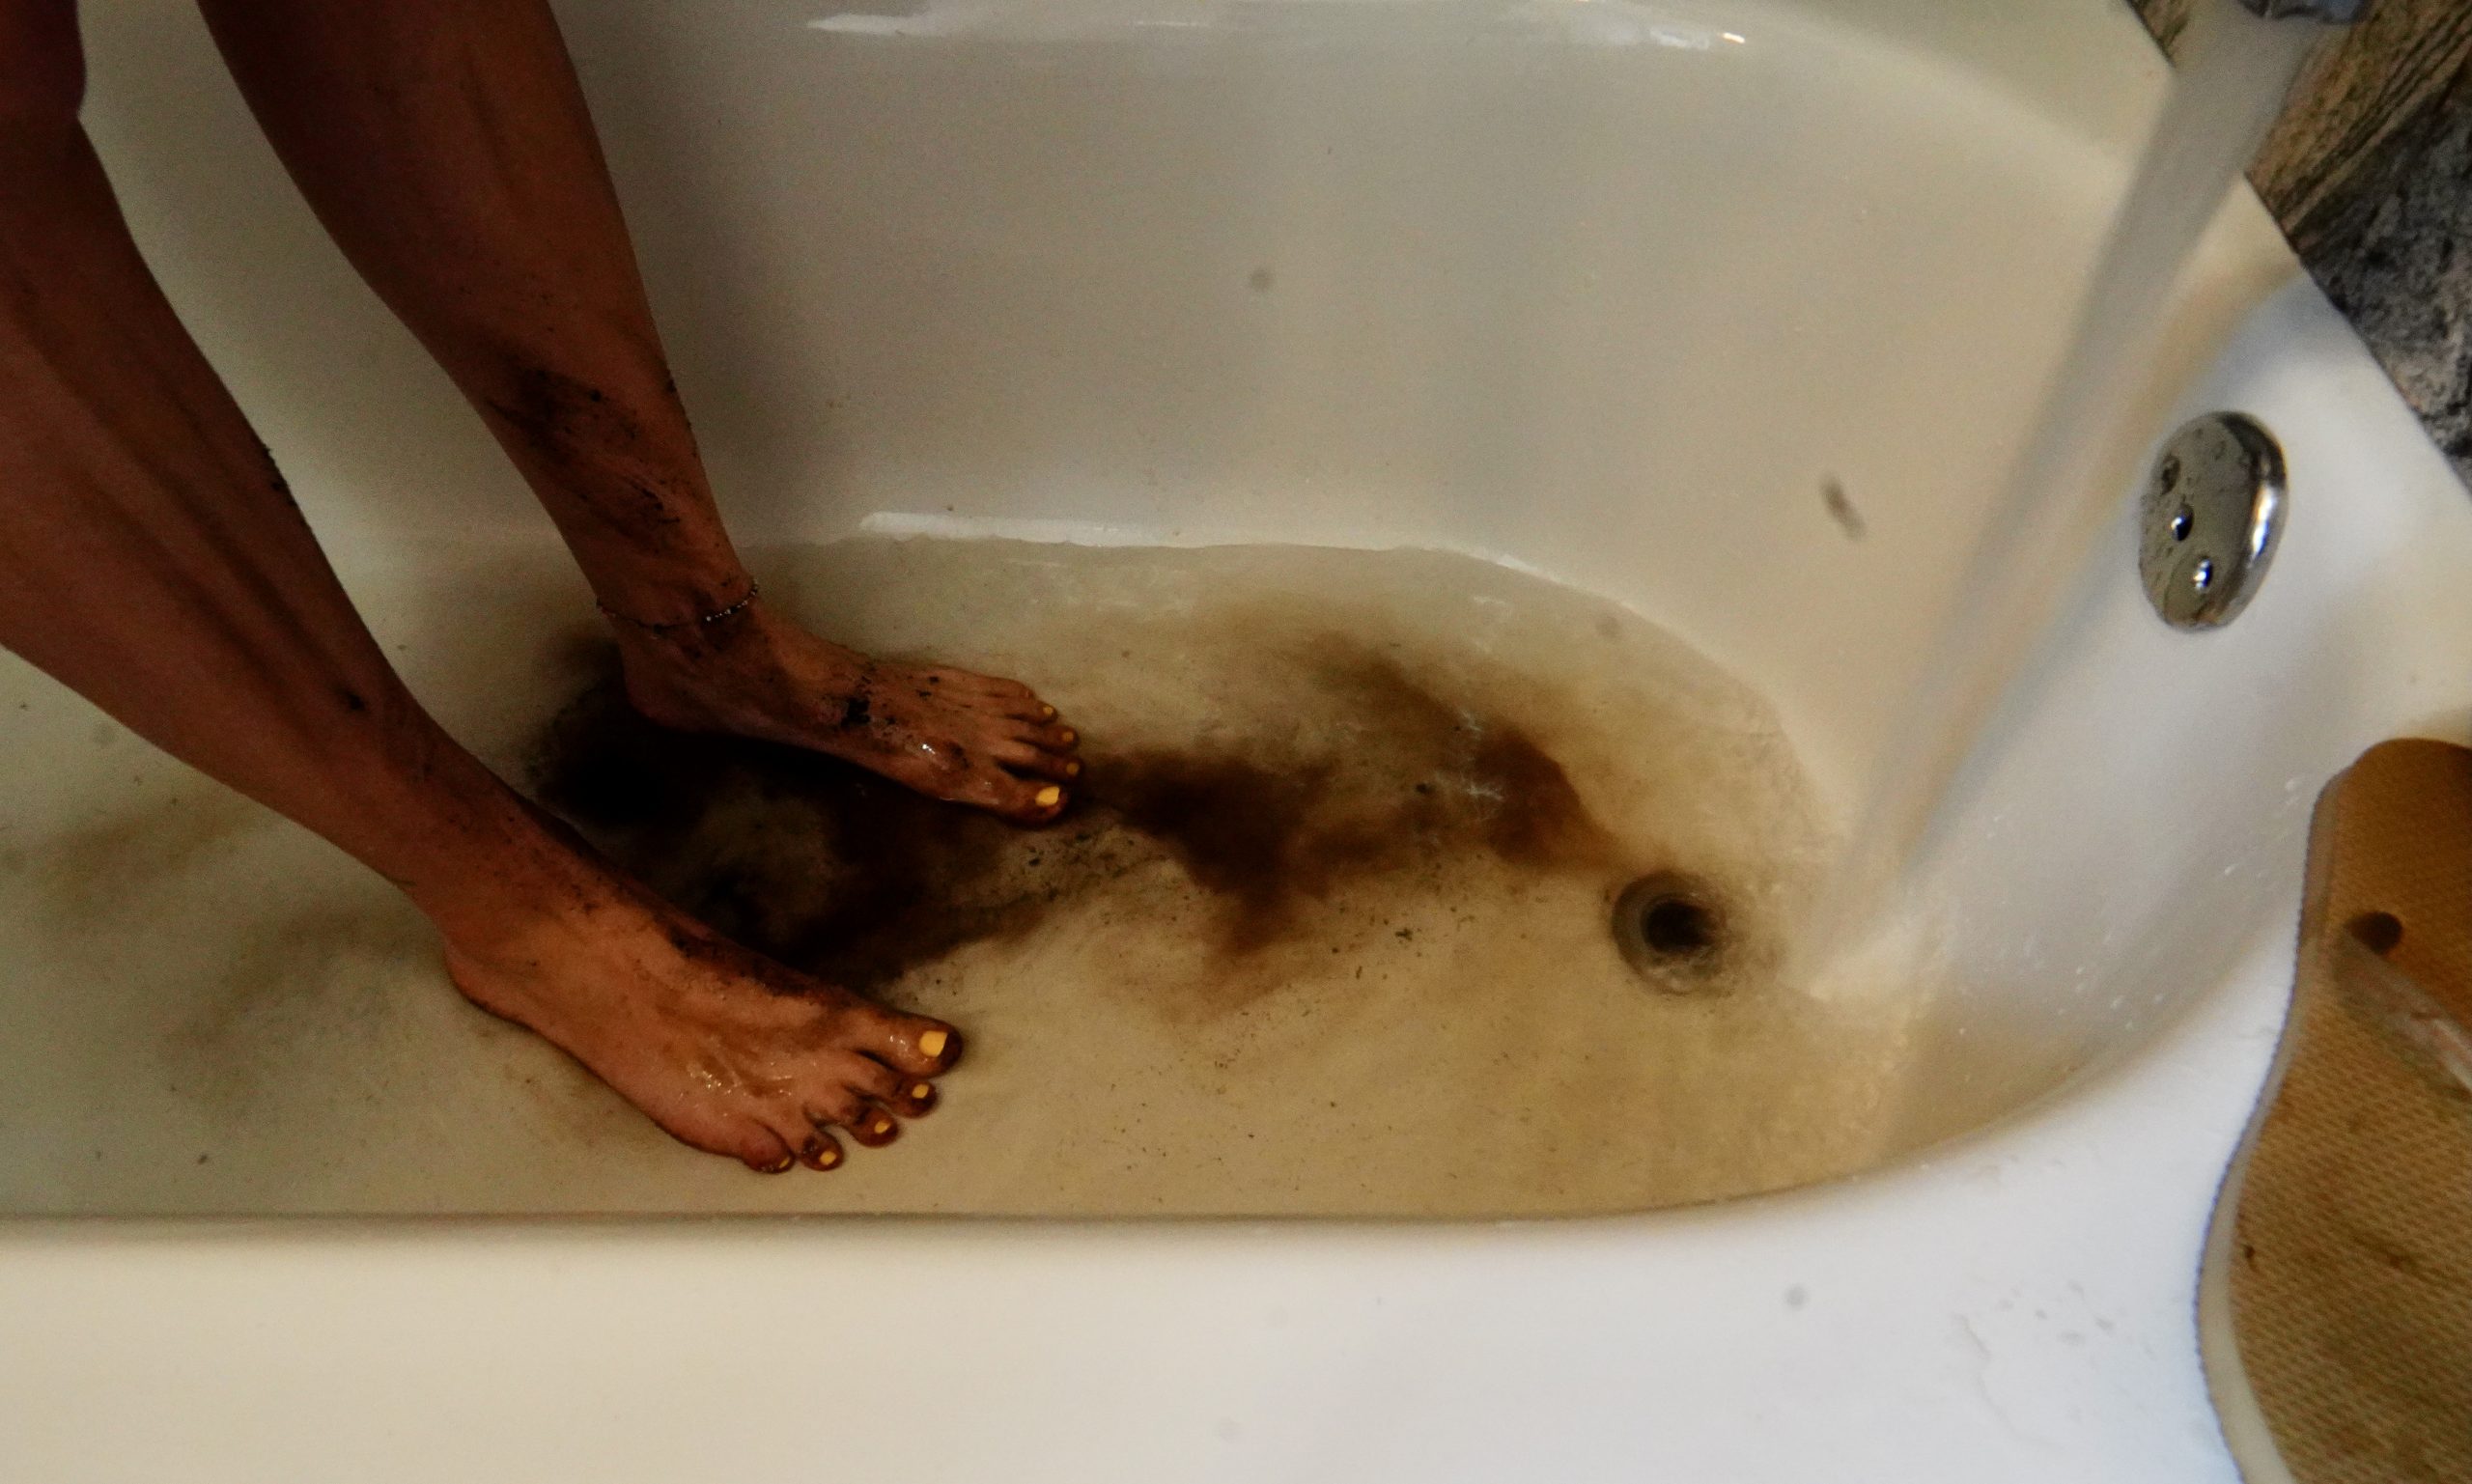 feet in bathtub with water running and soil washing off